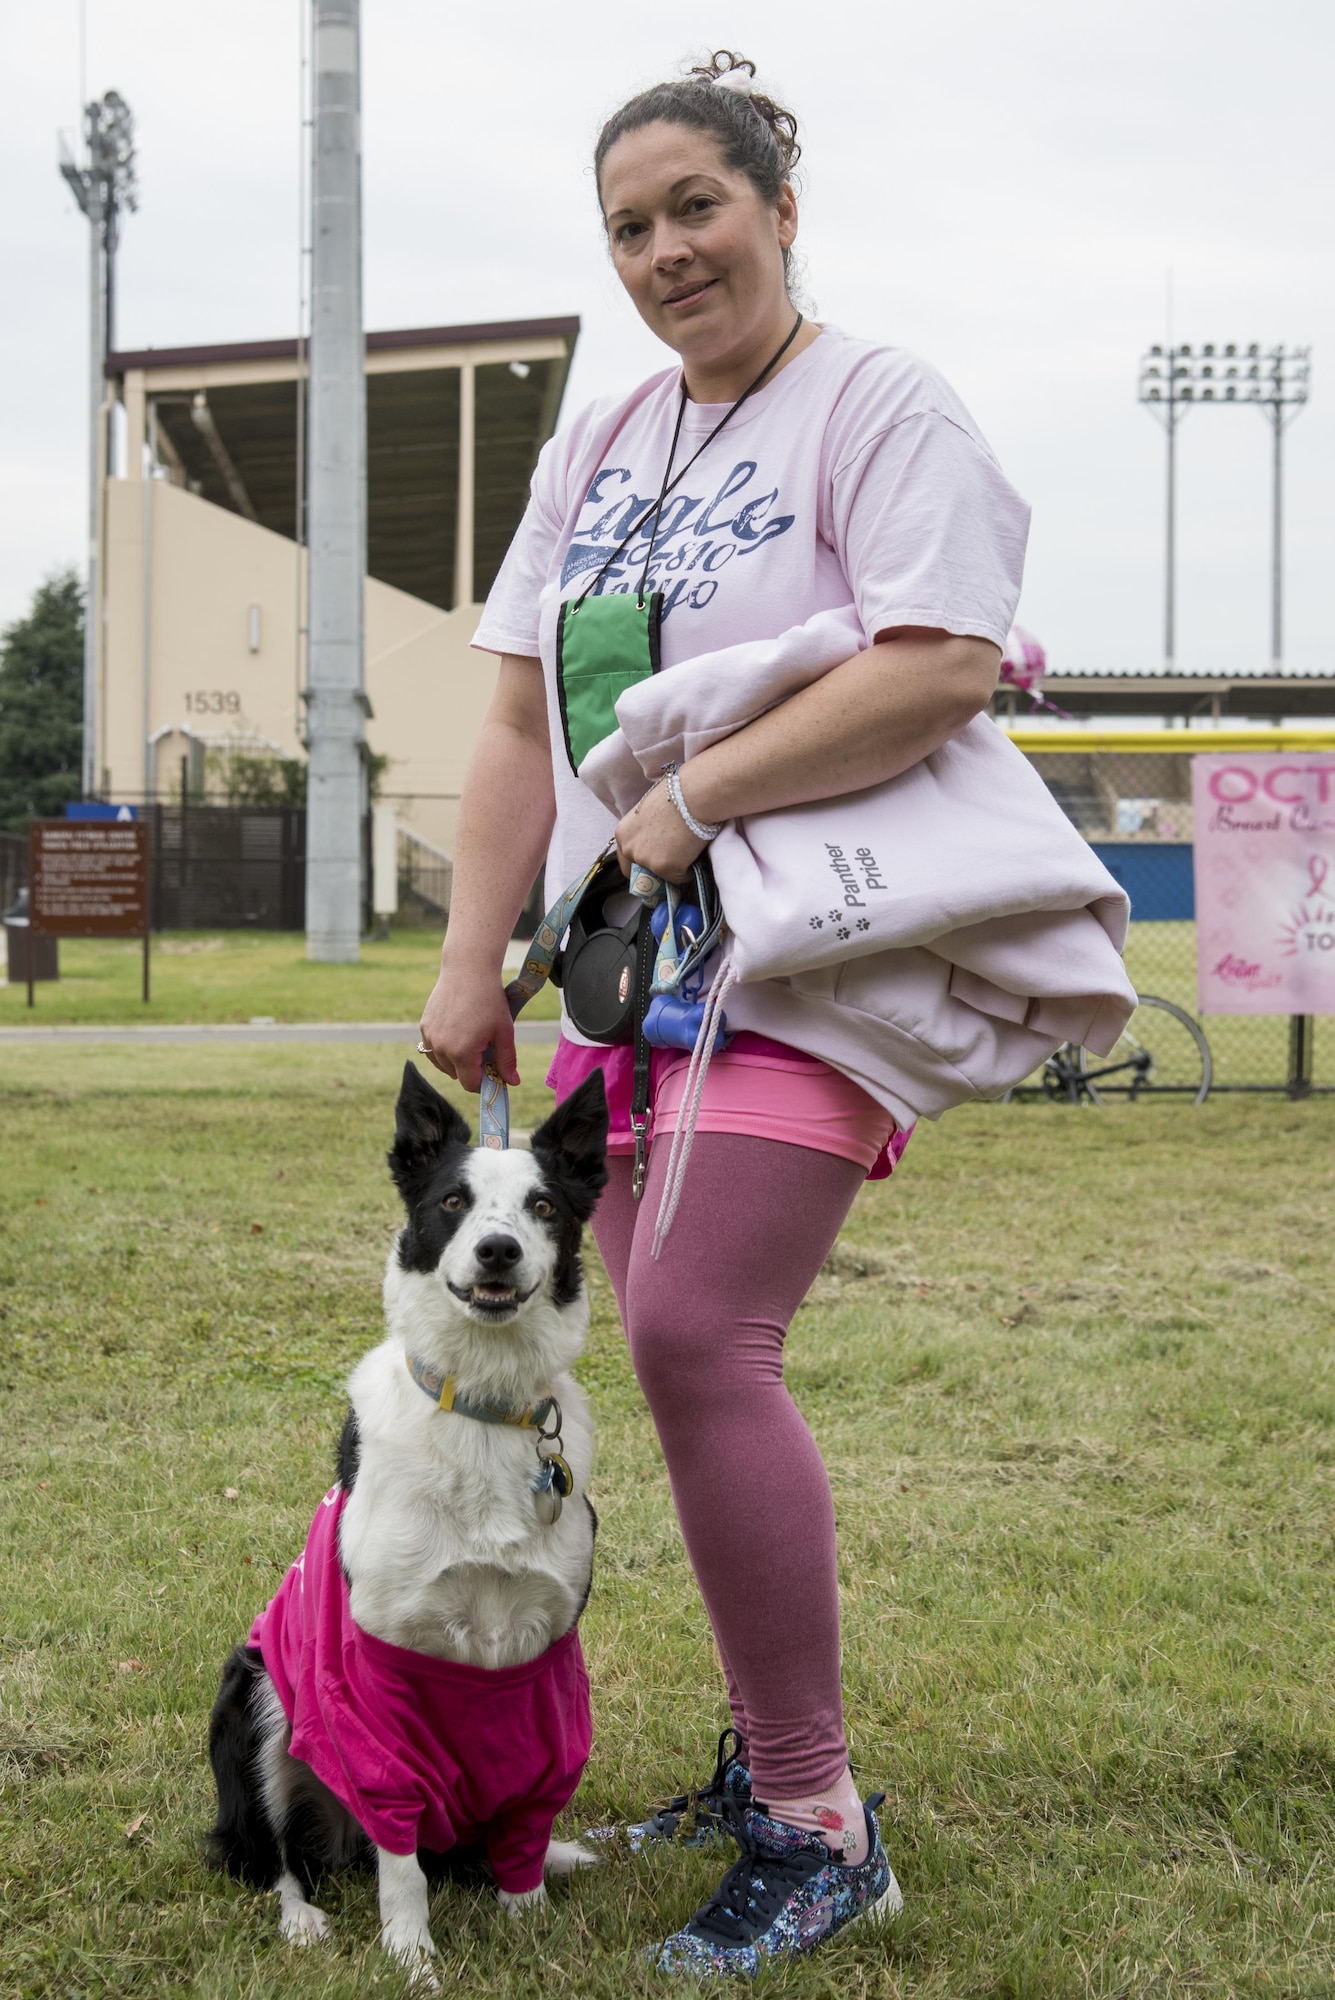 Deanna Melin poses for a picture with her dog during the Breast Cancer Awareness Month 5K run at Yokota Air Base, Japan, Oct. 06, 2017.